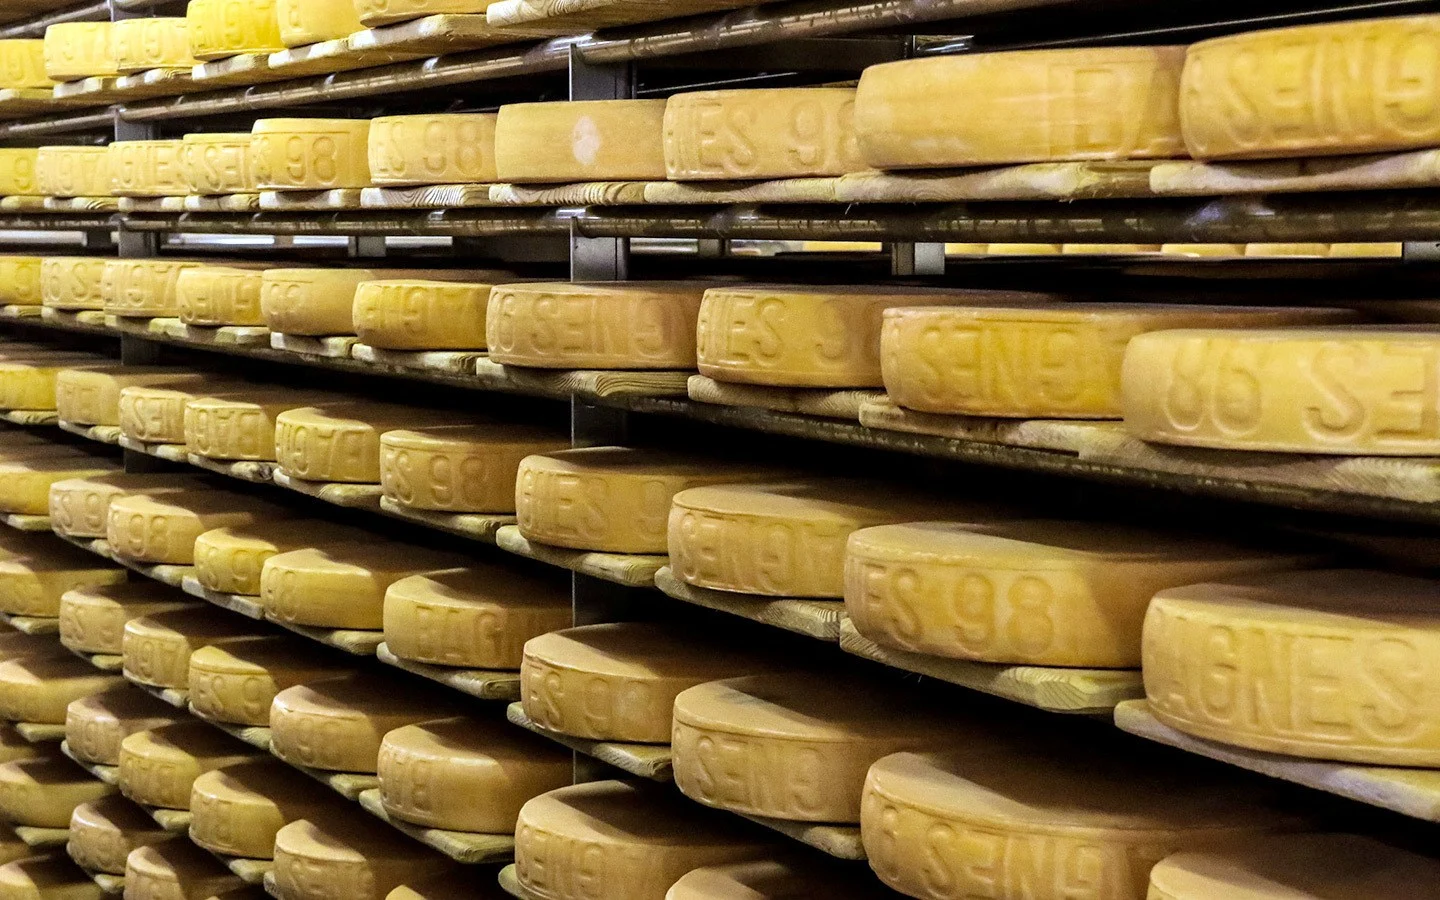 Stacks of cheese